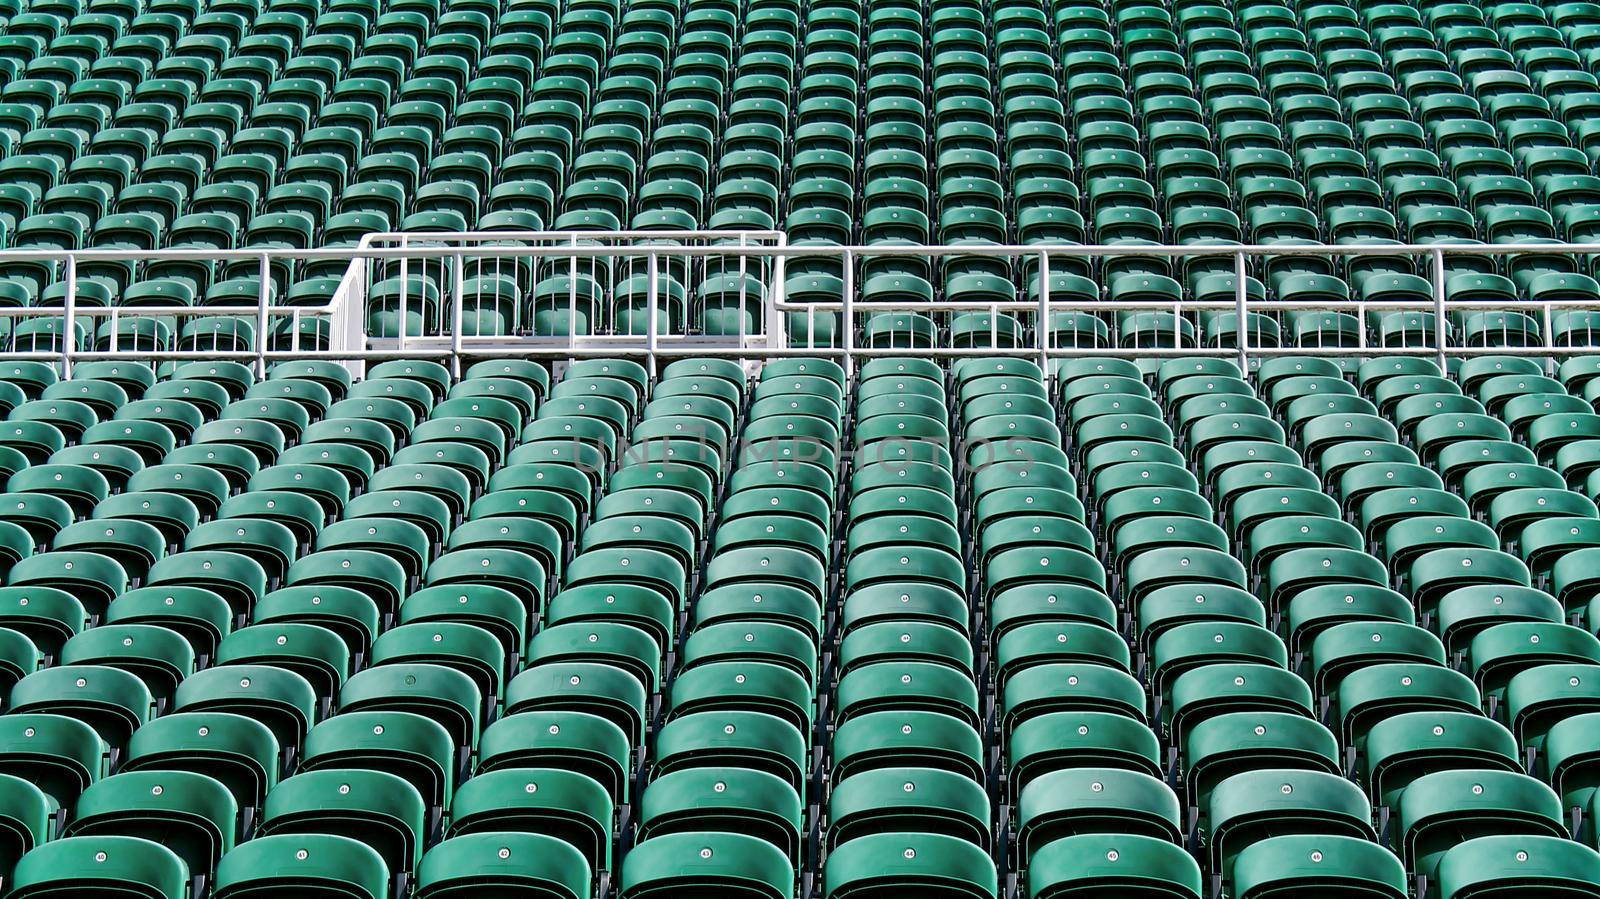 Rows of stadium seating by speedfighter